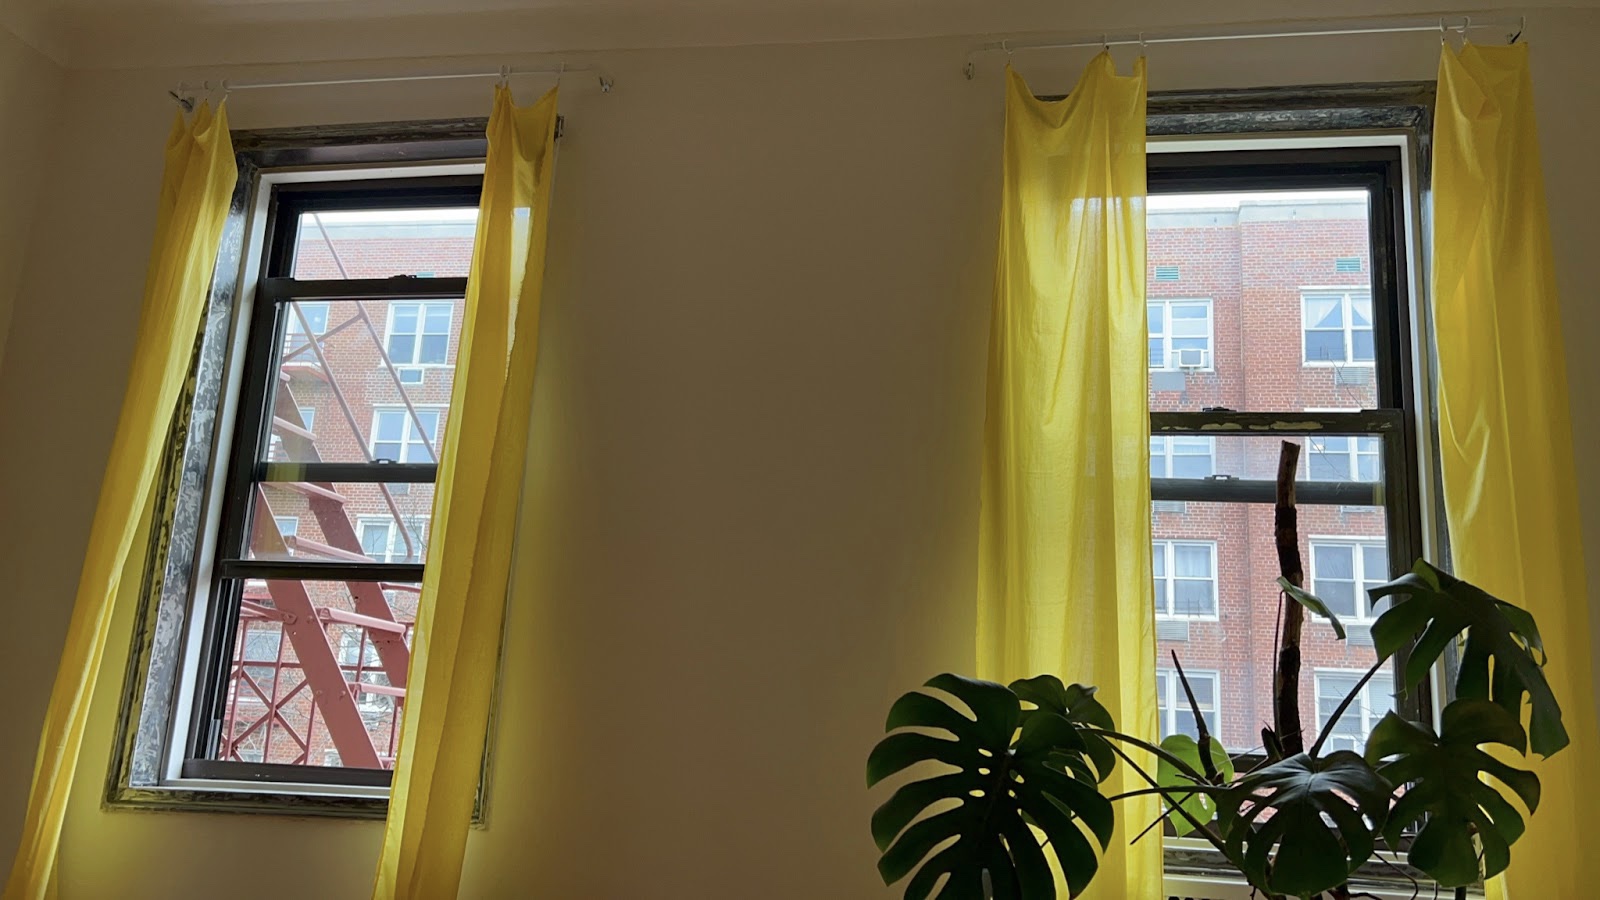 The view from inside an apartment, taken on a digital camera. Two windows with open yellow curtains. It’s daytime and the city outside is visible - a fire escape, an apartment building, the tiniest edge of the sky. Inside there is a Cheese Plant, its green leaves silhouetted in front of the window, in the bottom right of the image.